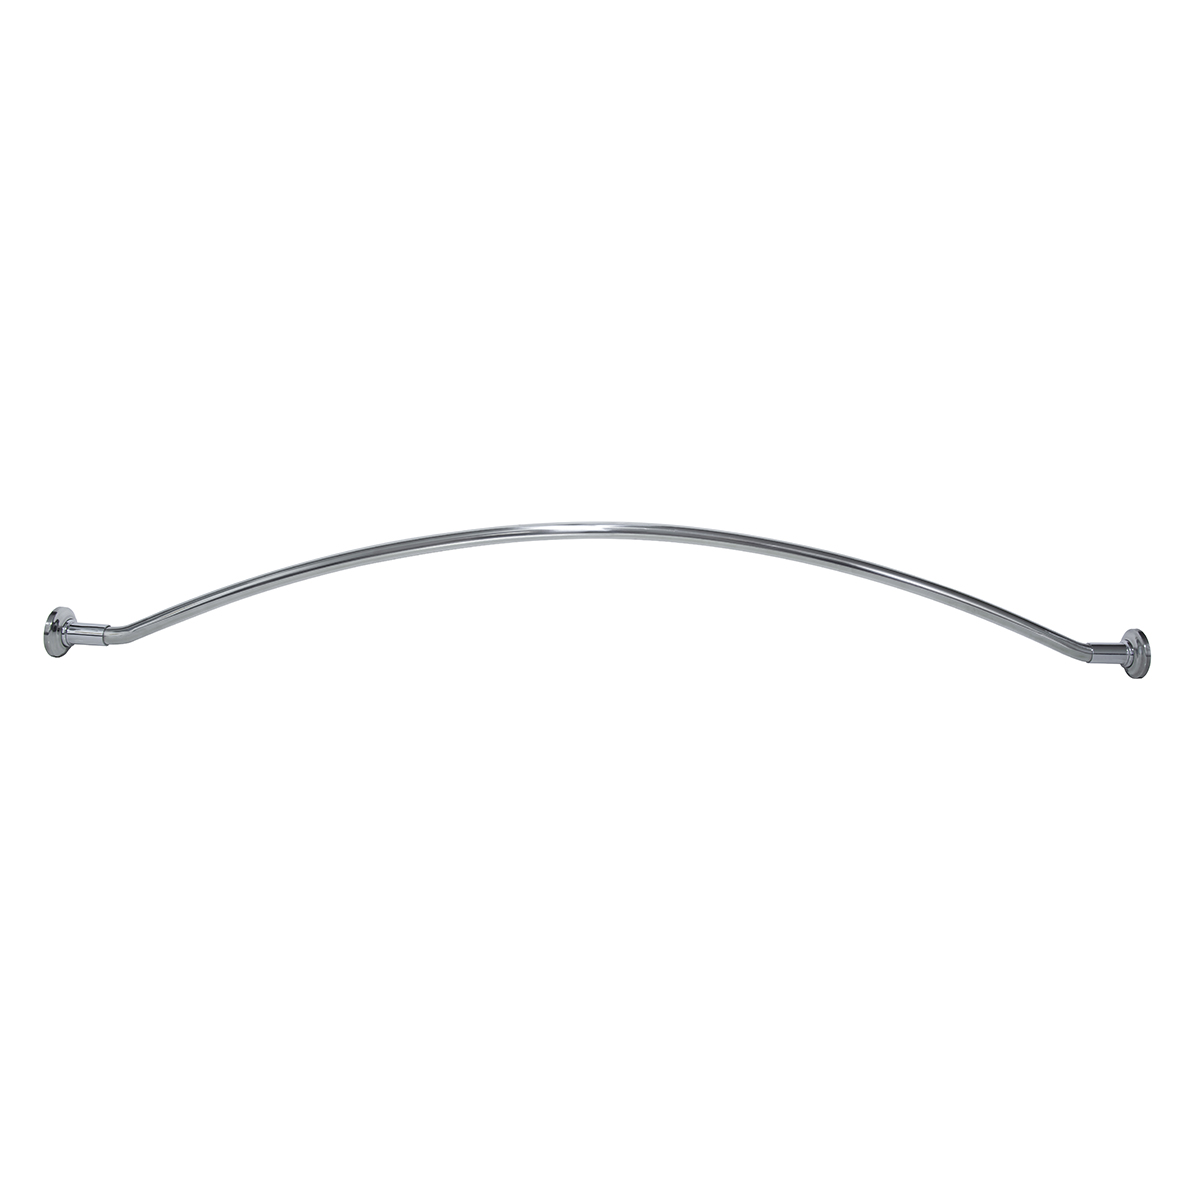 Shower Rods - Curved Shower Rod - 5 - Polished Stainless Steel